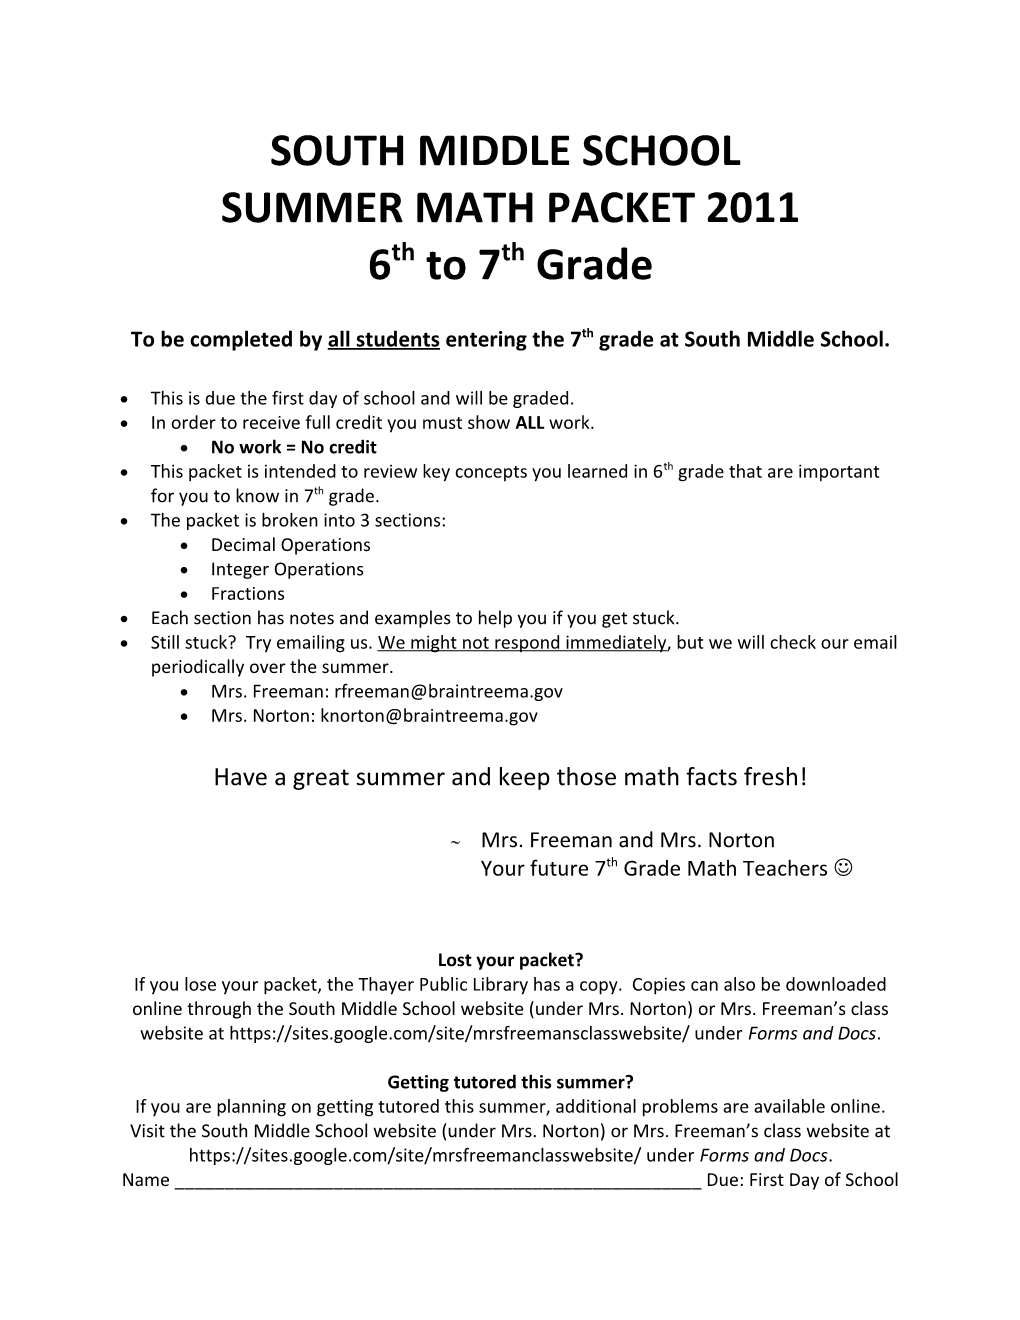 To Be Completed by All Students Entering the 7Th Grade at South Middle School